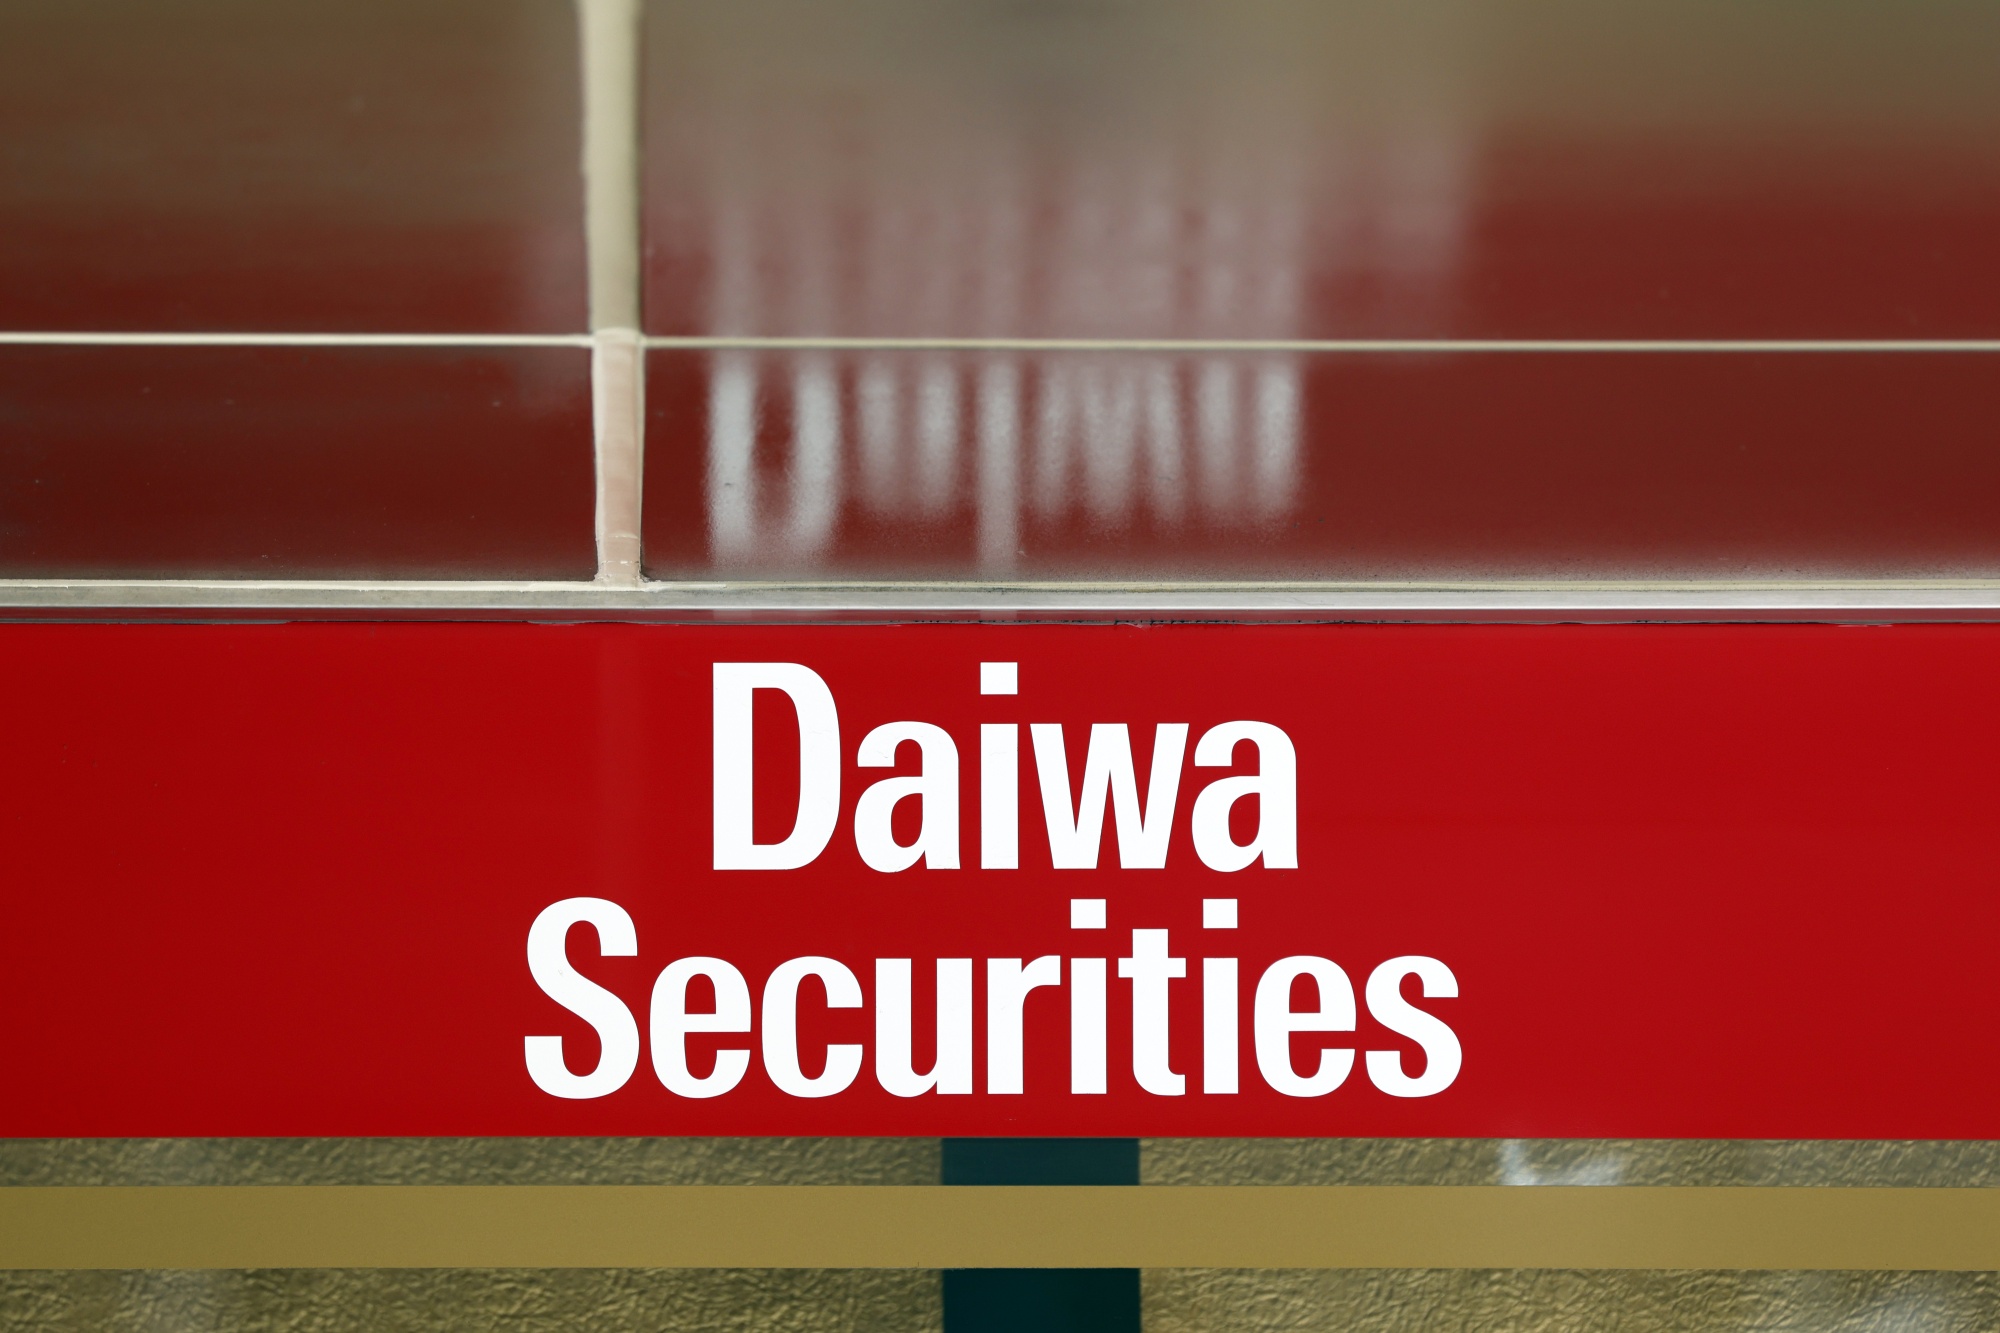 Daiwa Readies Fixed-Income Trading Arm for Bond Market Revival